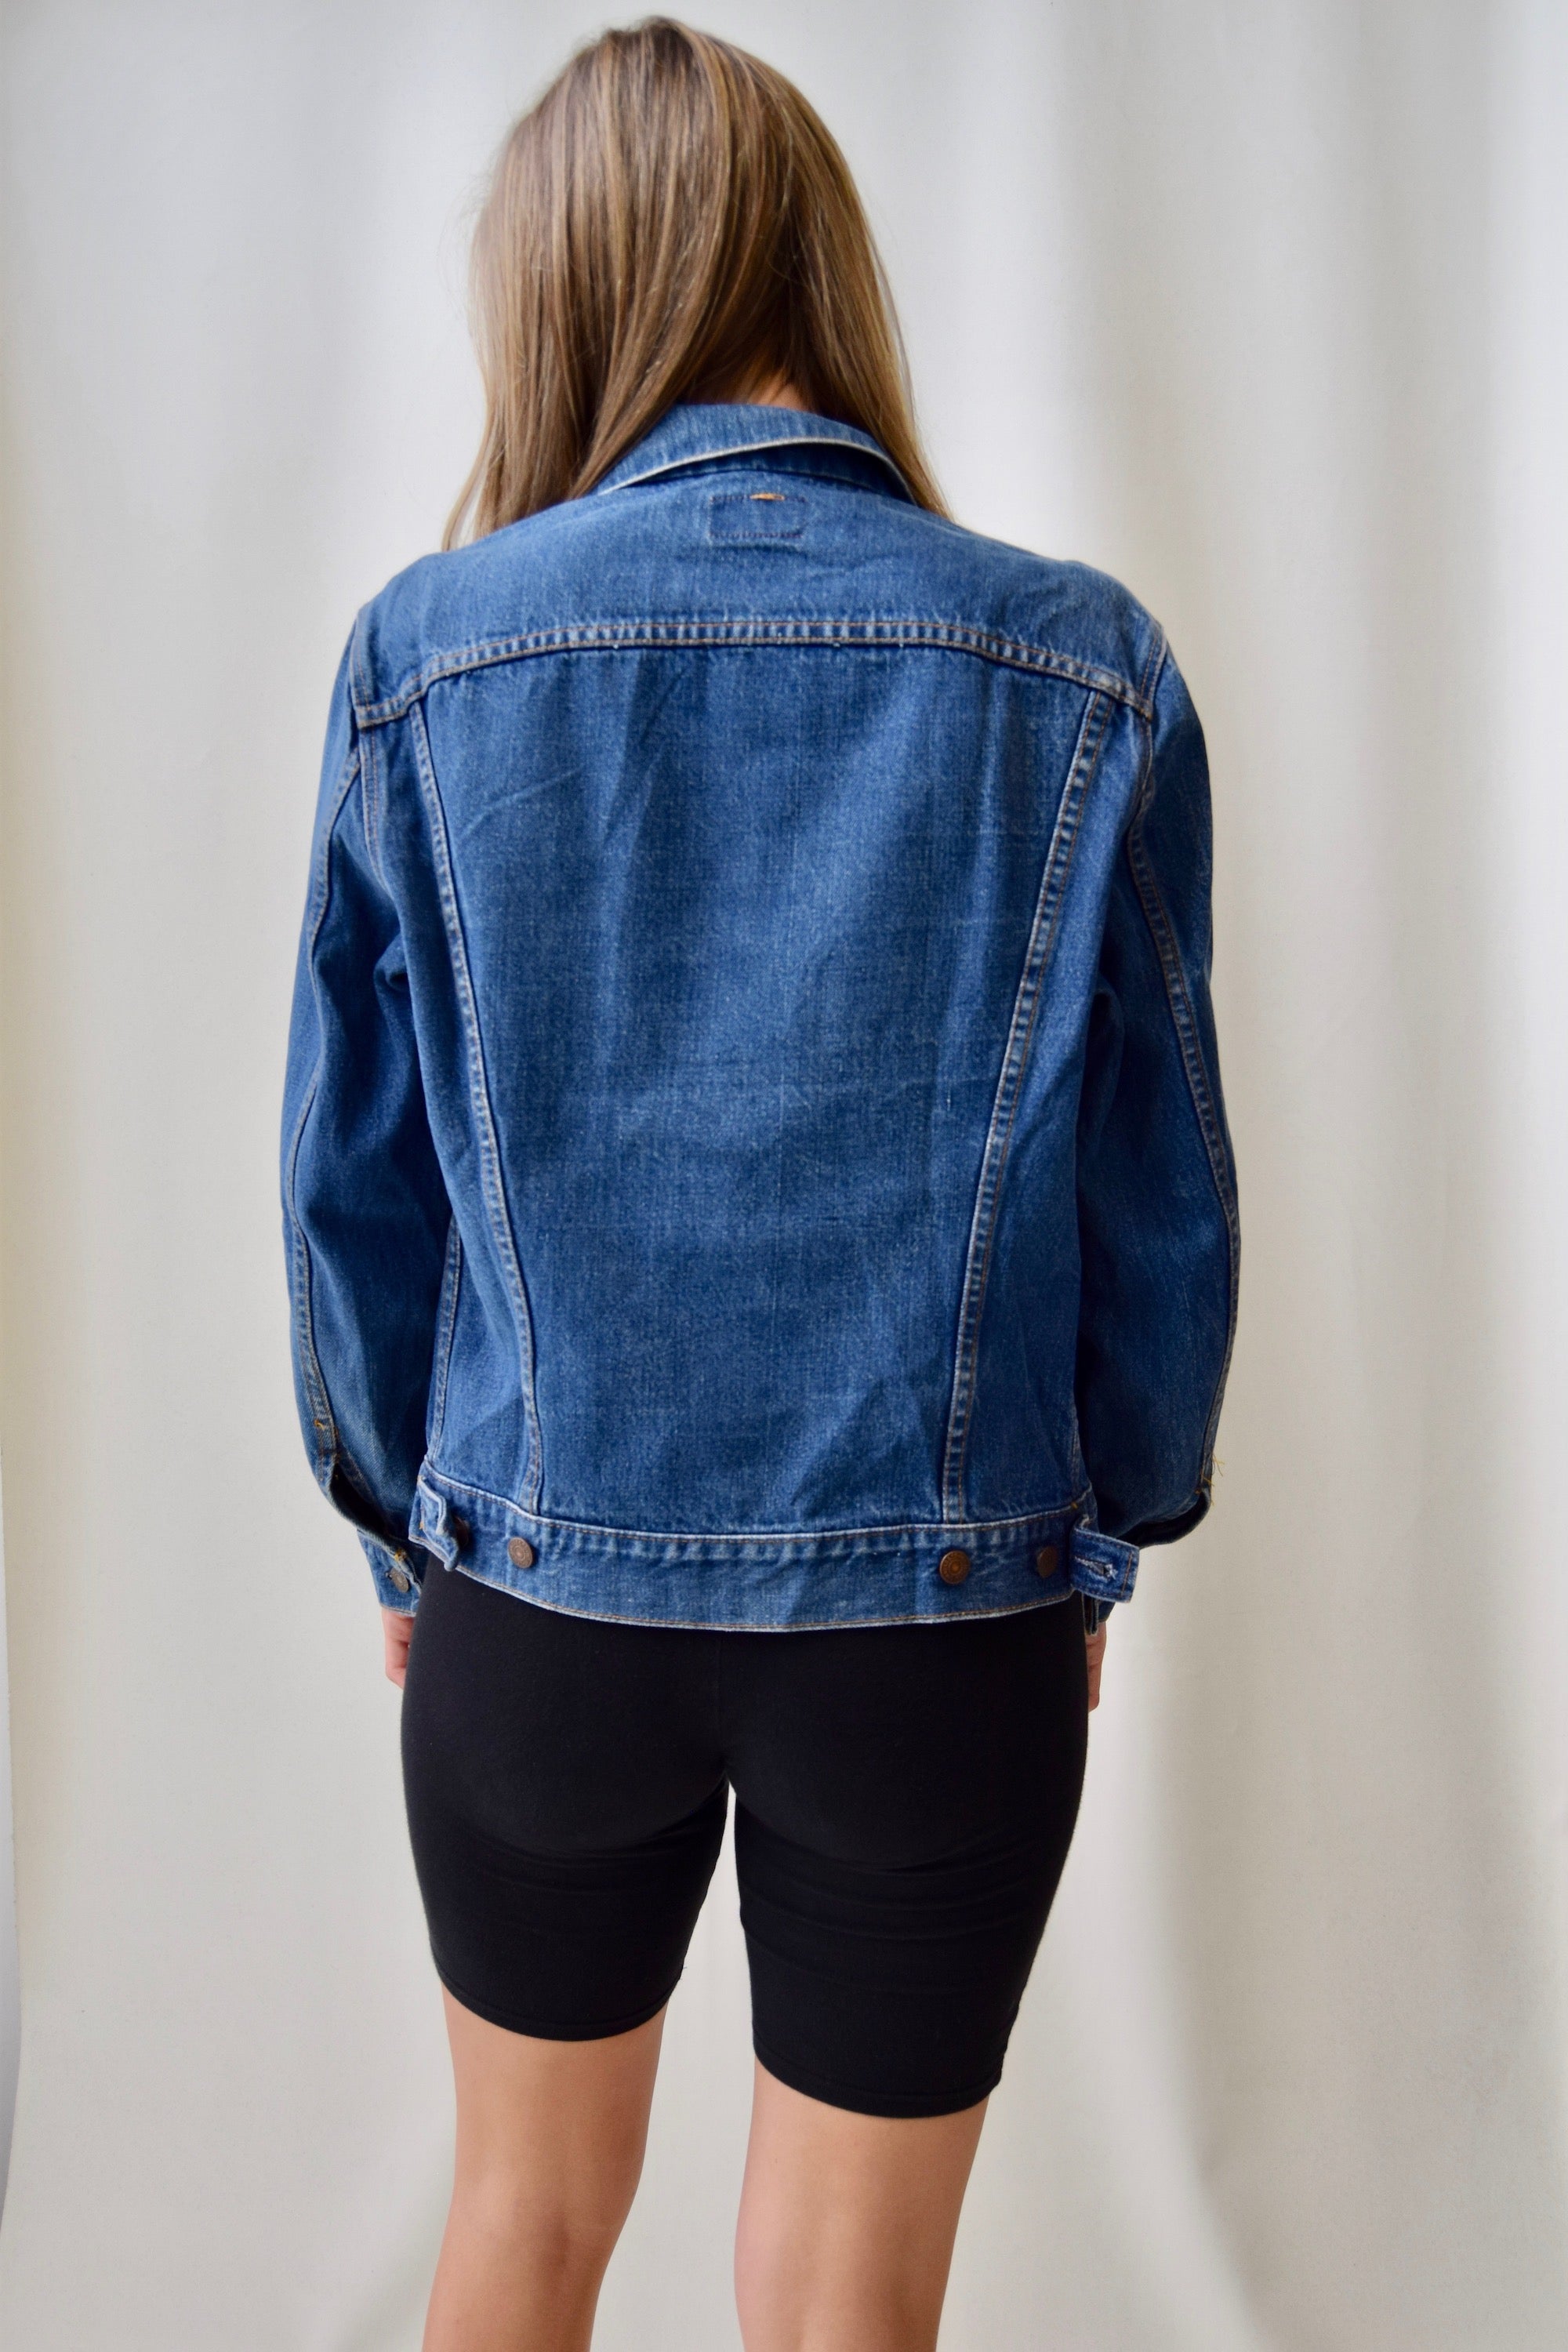 Levi's Made in USA Denim Jacket